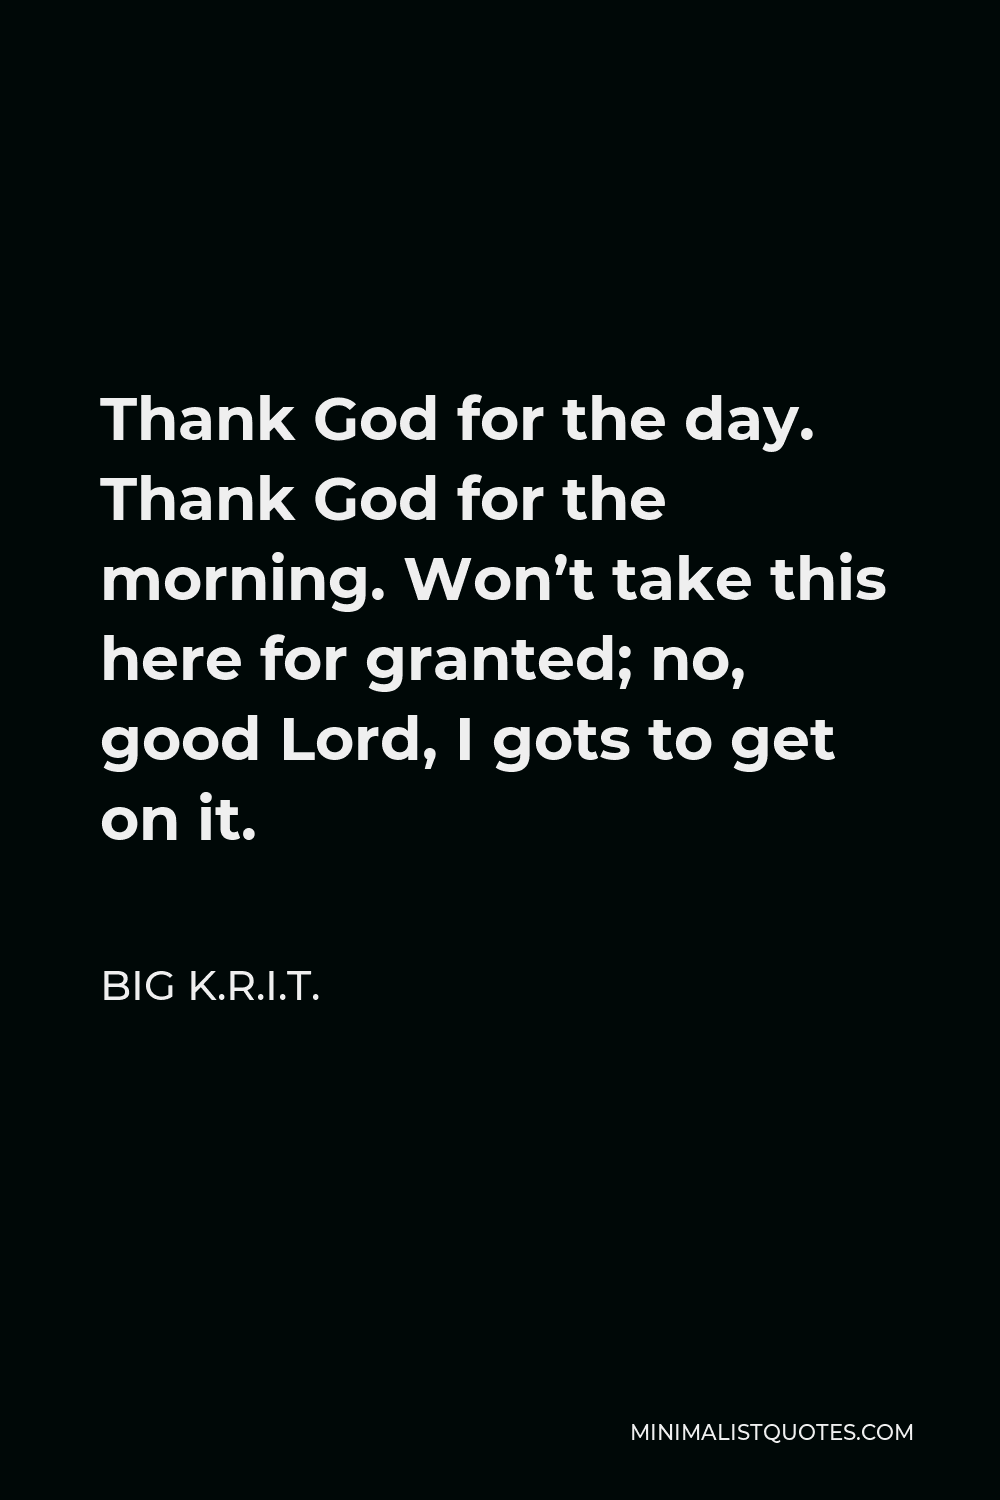 Big K.R.I.T. Quote - Thank God for the day. Thank God for the morning. Won’t take this here for granted; no, good Lord, I gots to get on it.